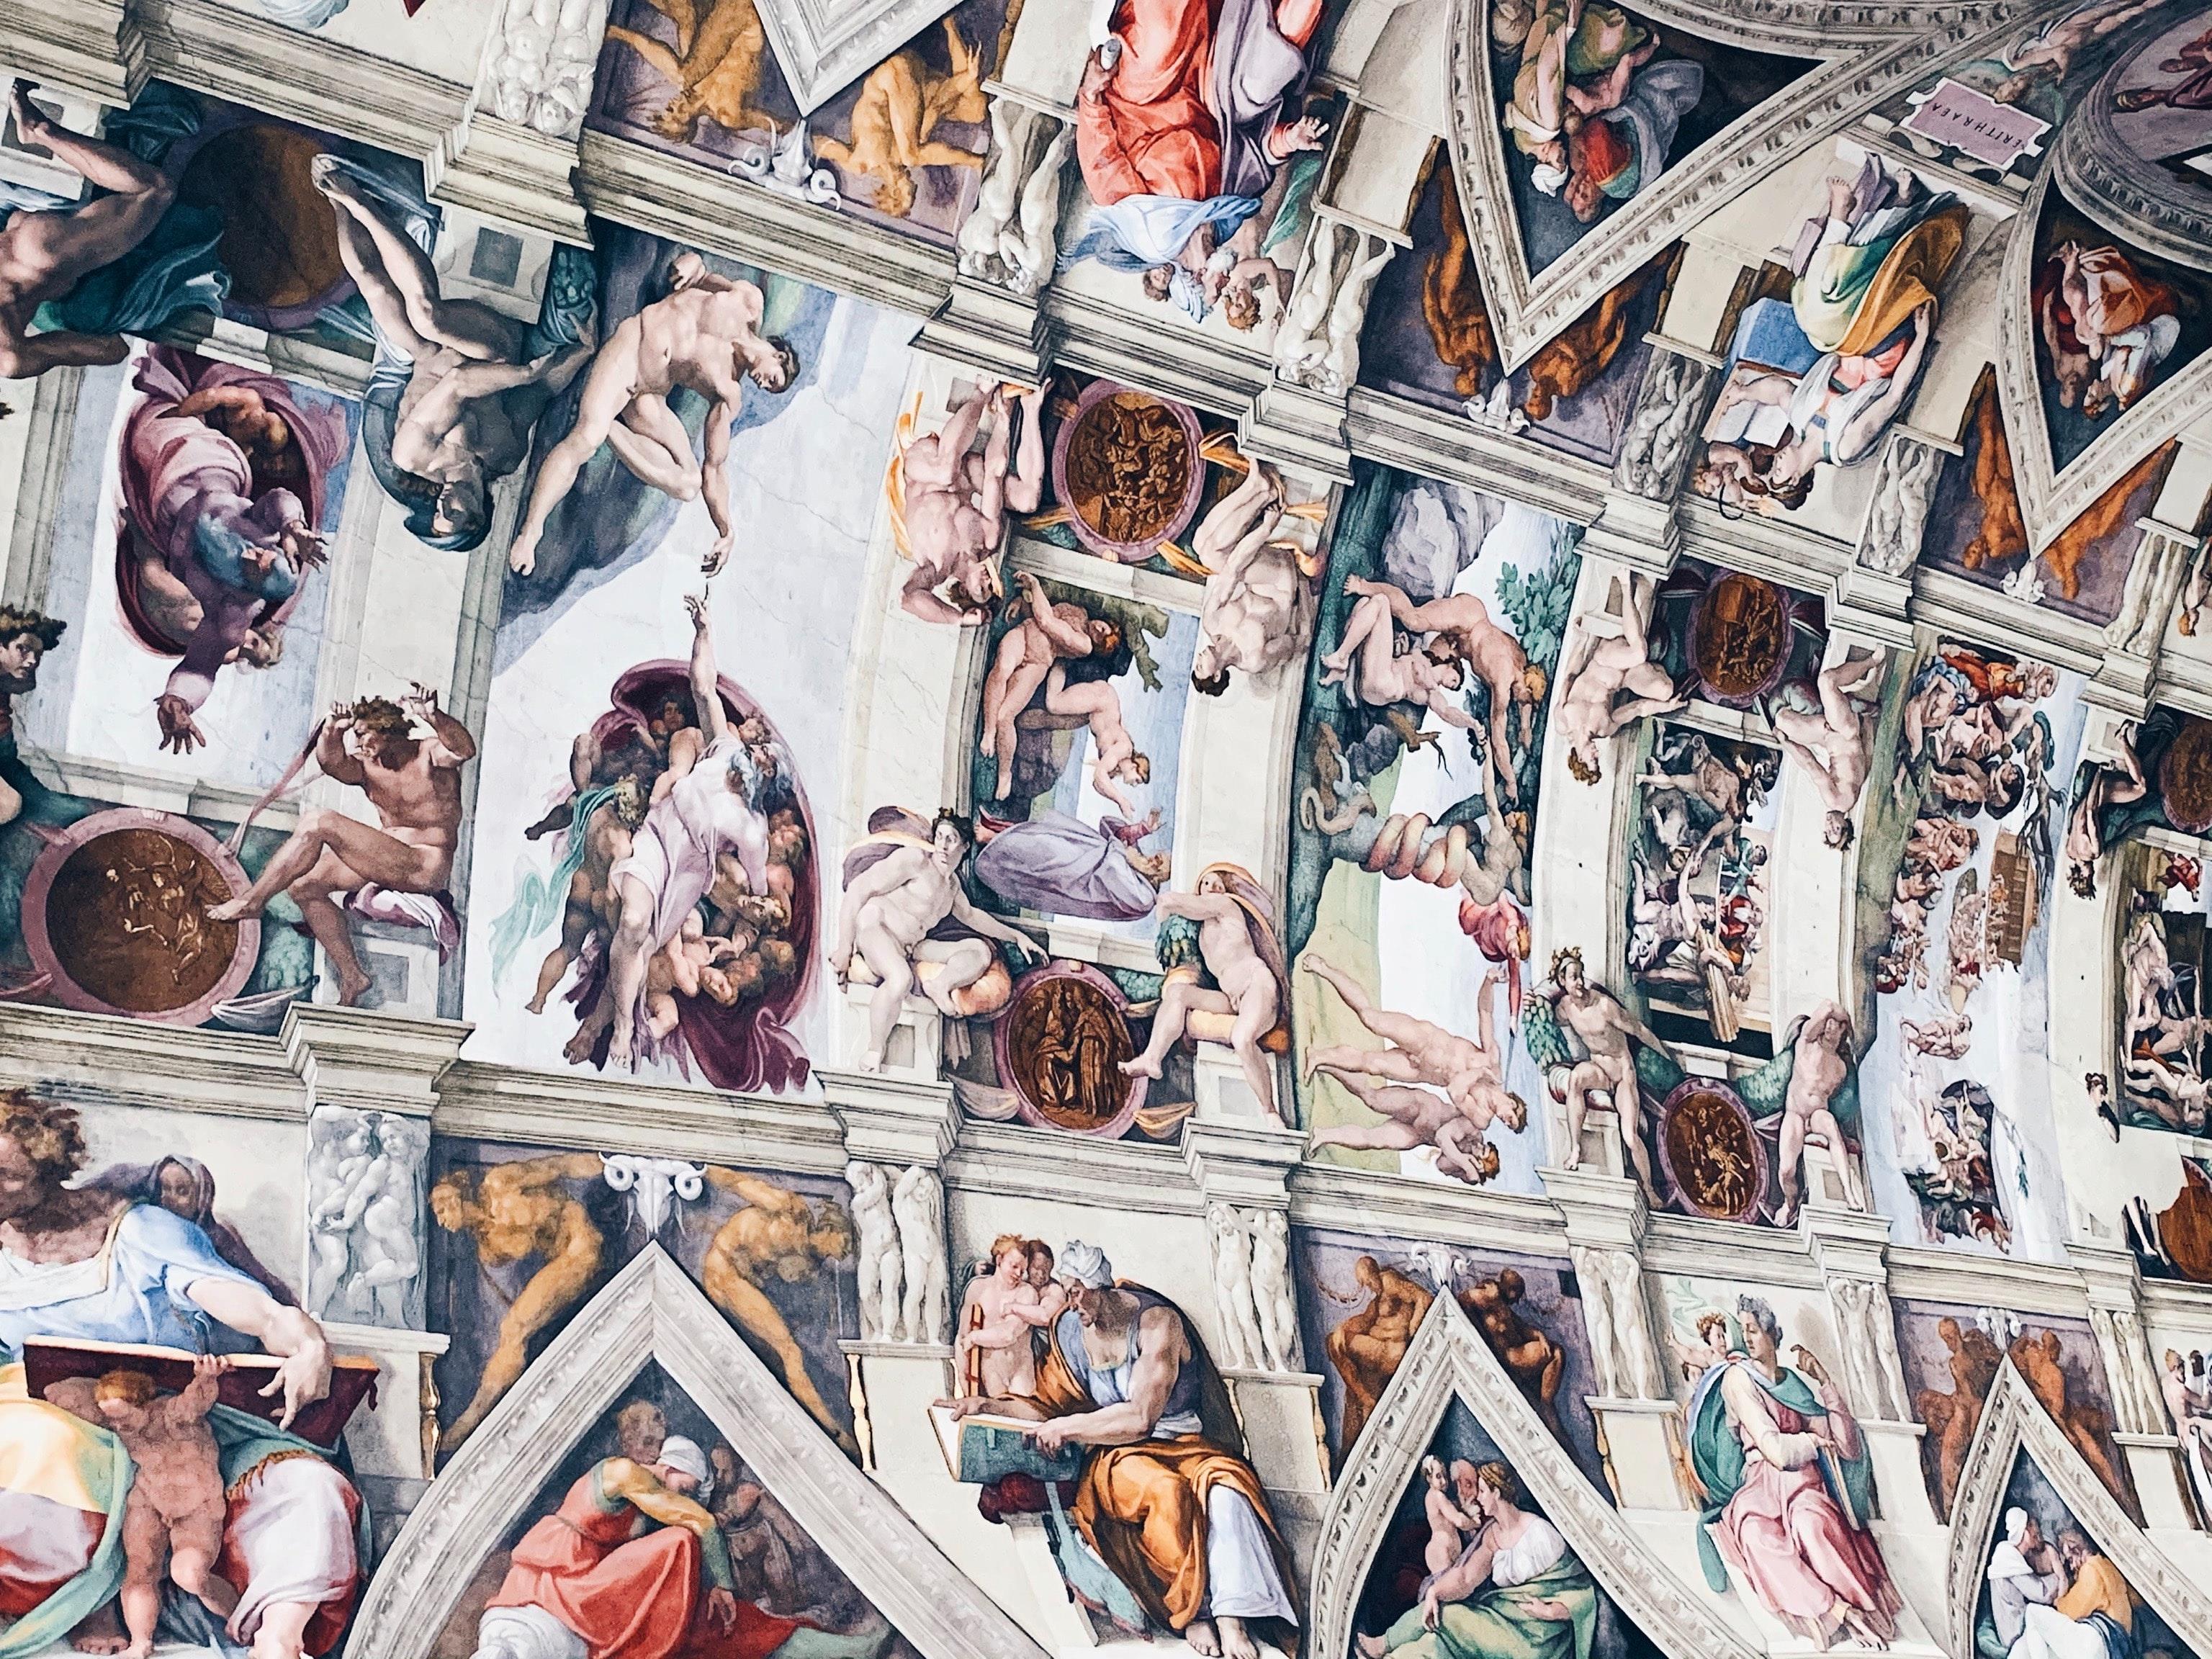 guided-tour-vatican-museums-and-sistine-chapel-7